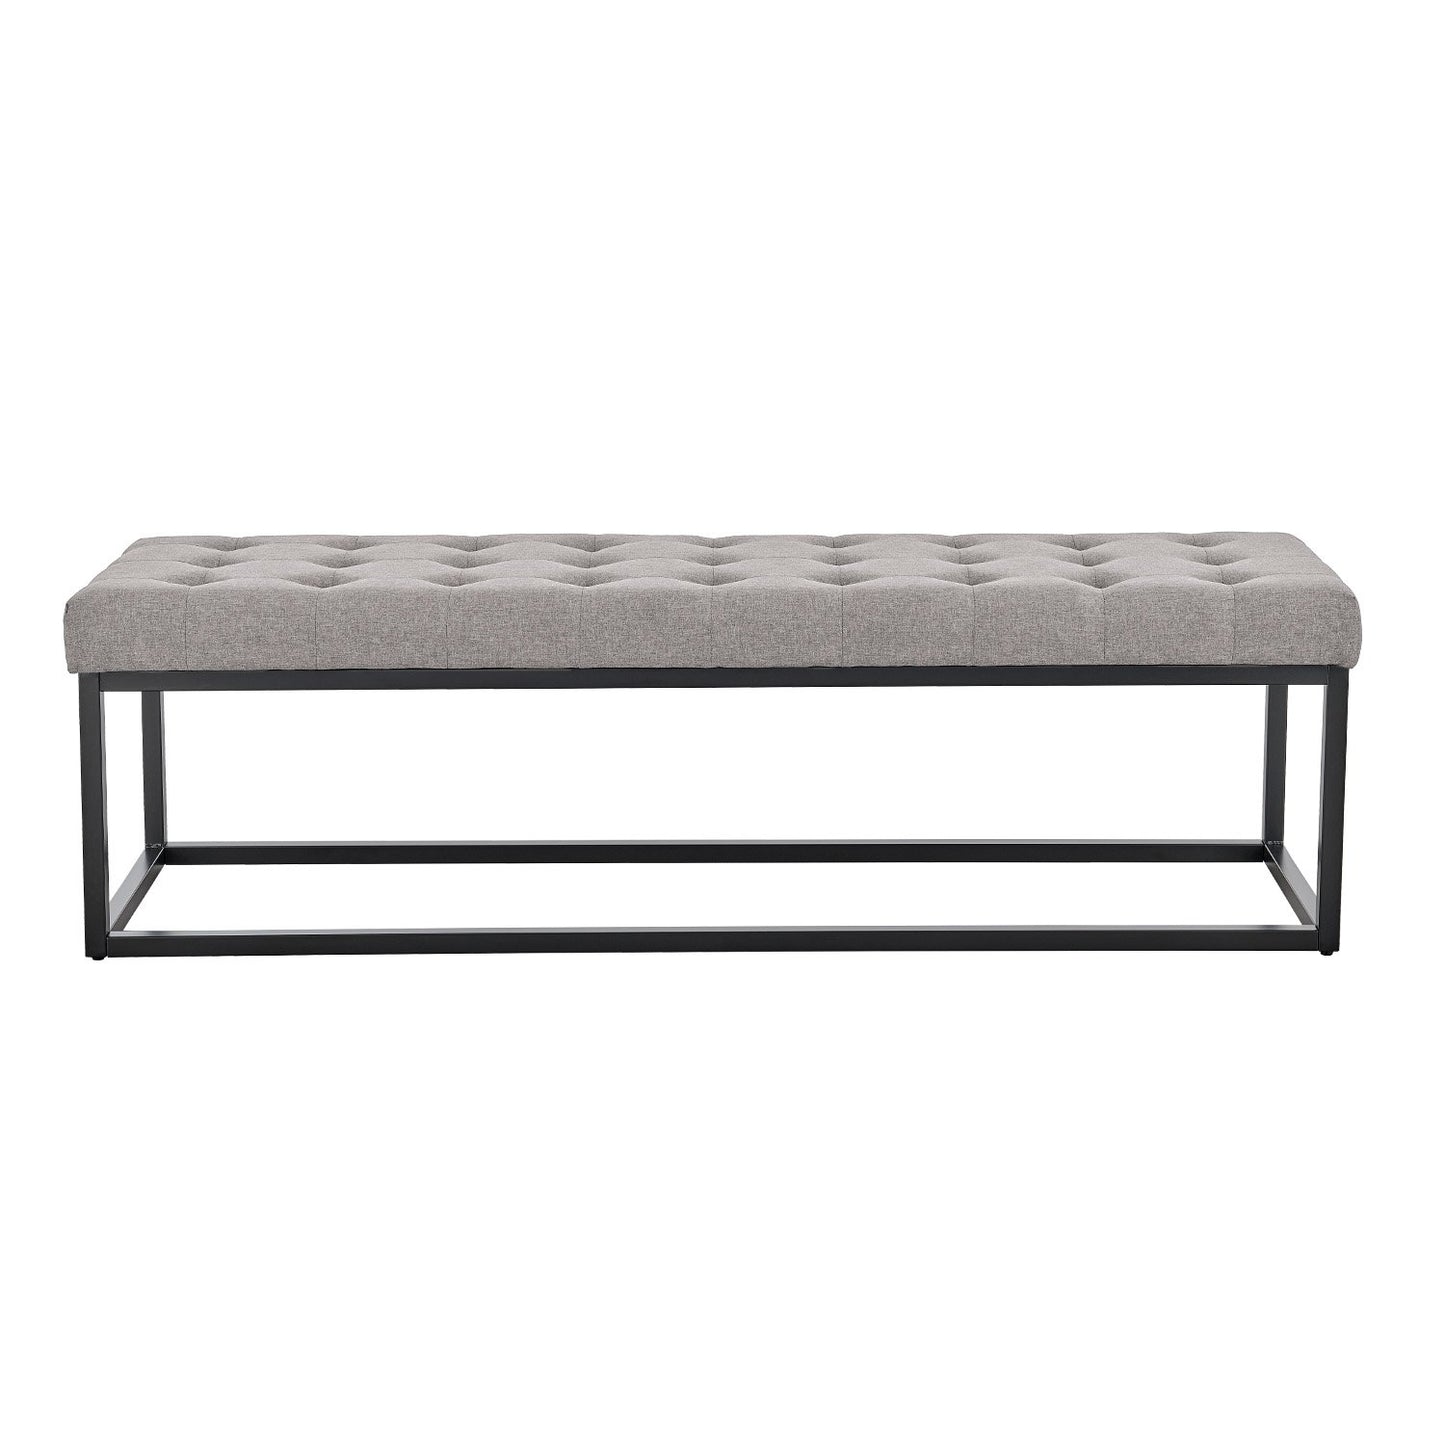 Sarantino Cameron Button-tufted Upholstered Bench With Metal Legs By Sarantino - Light Grey Linen